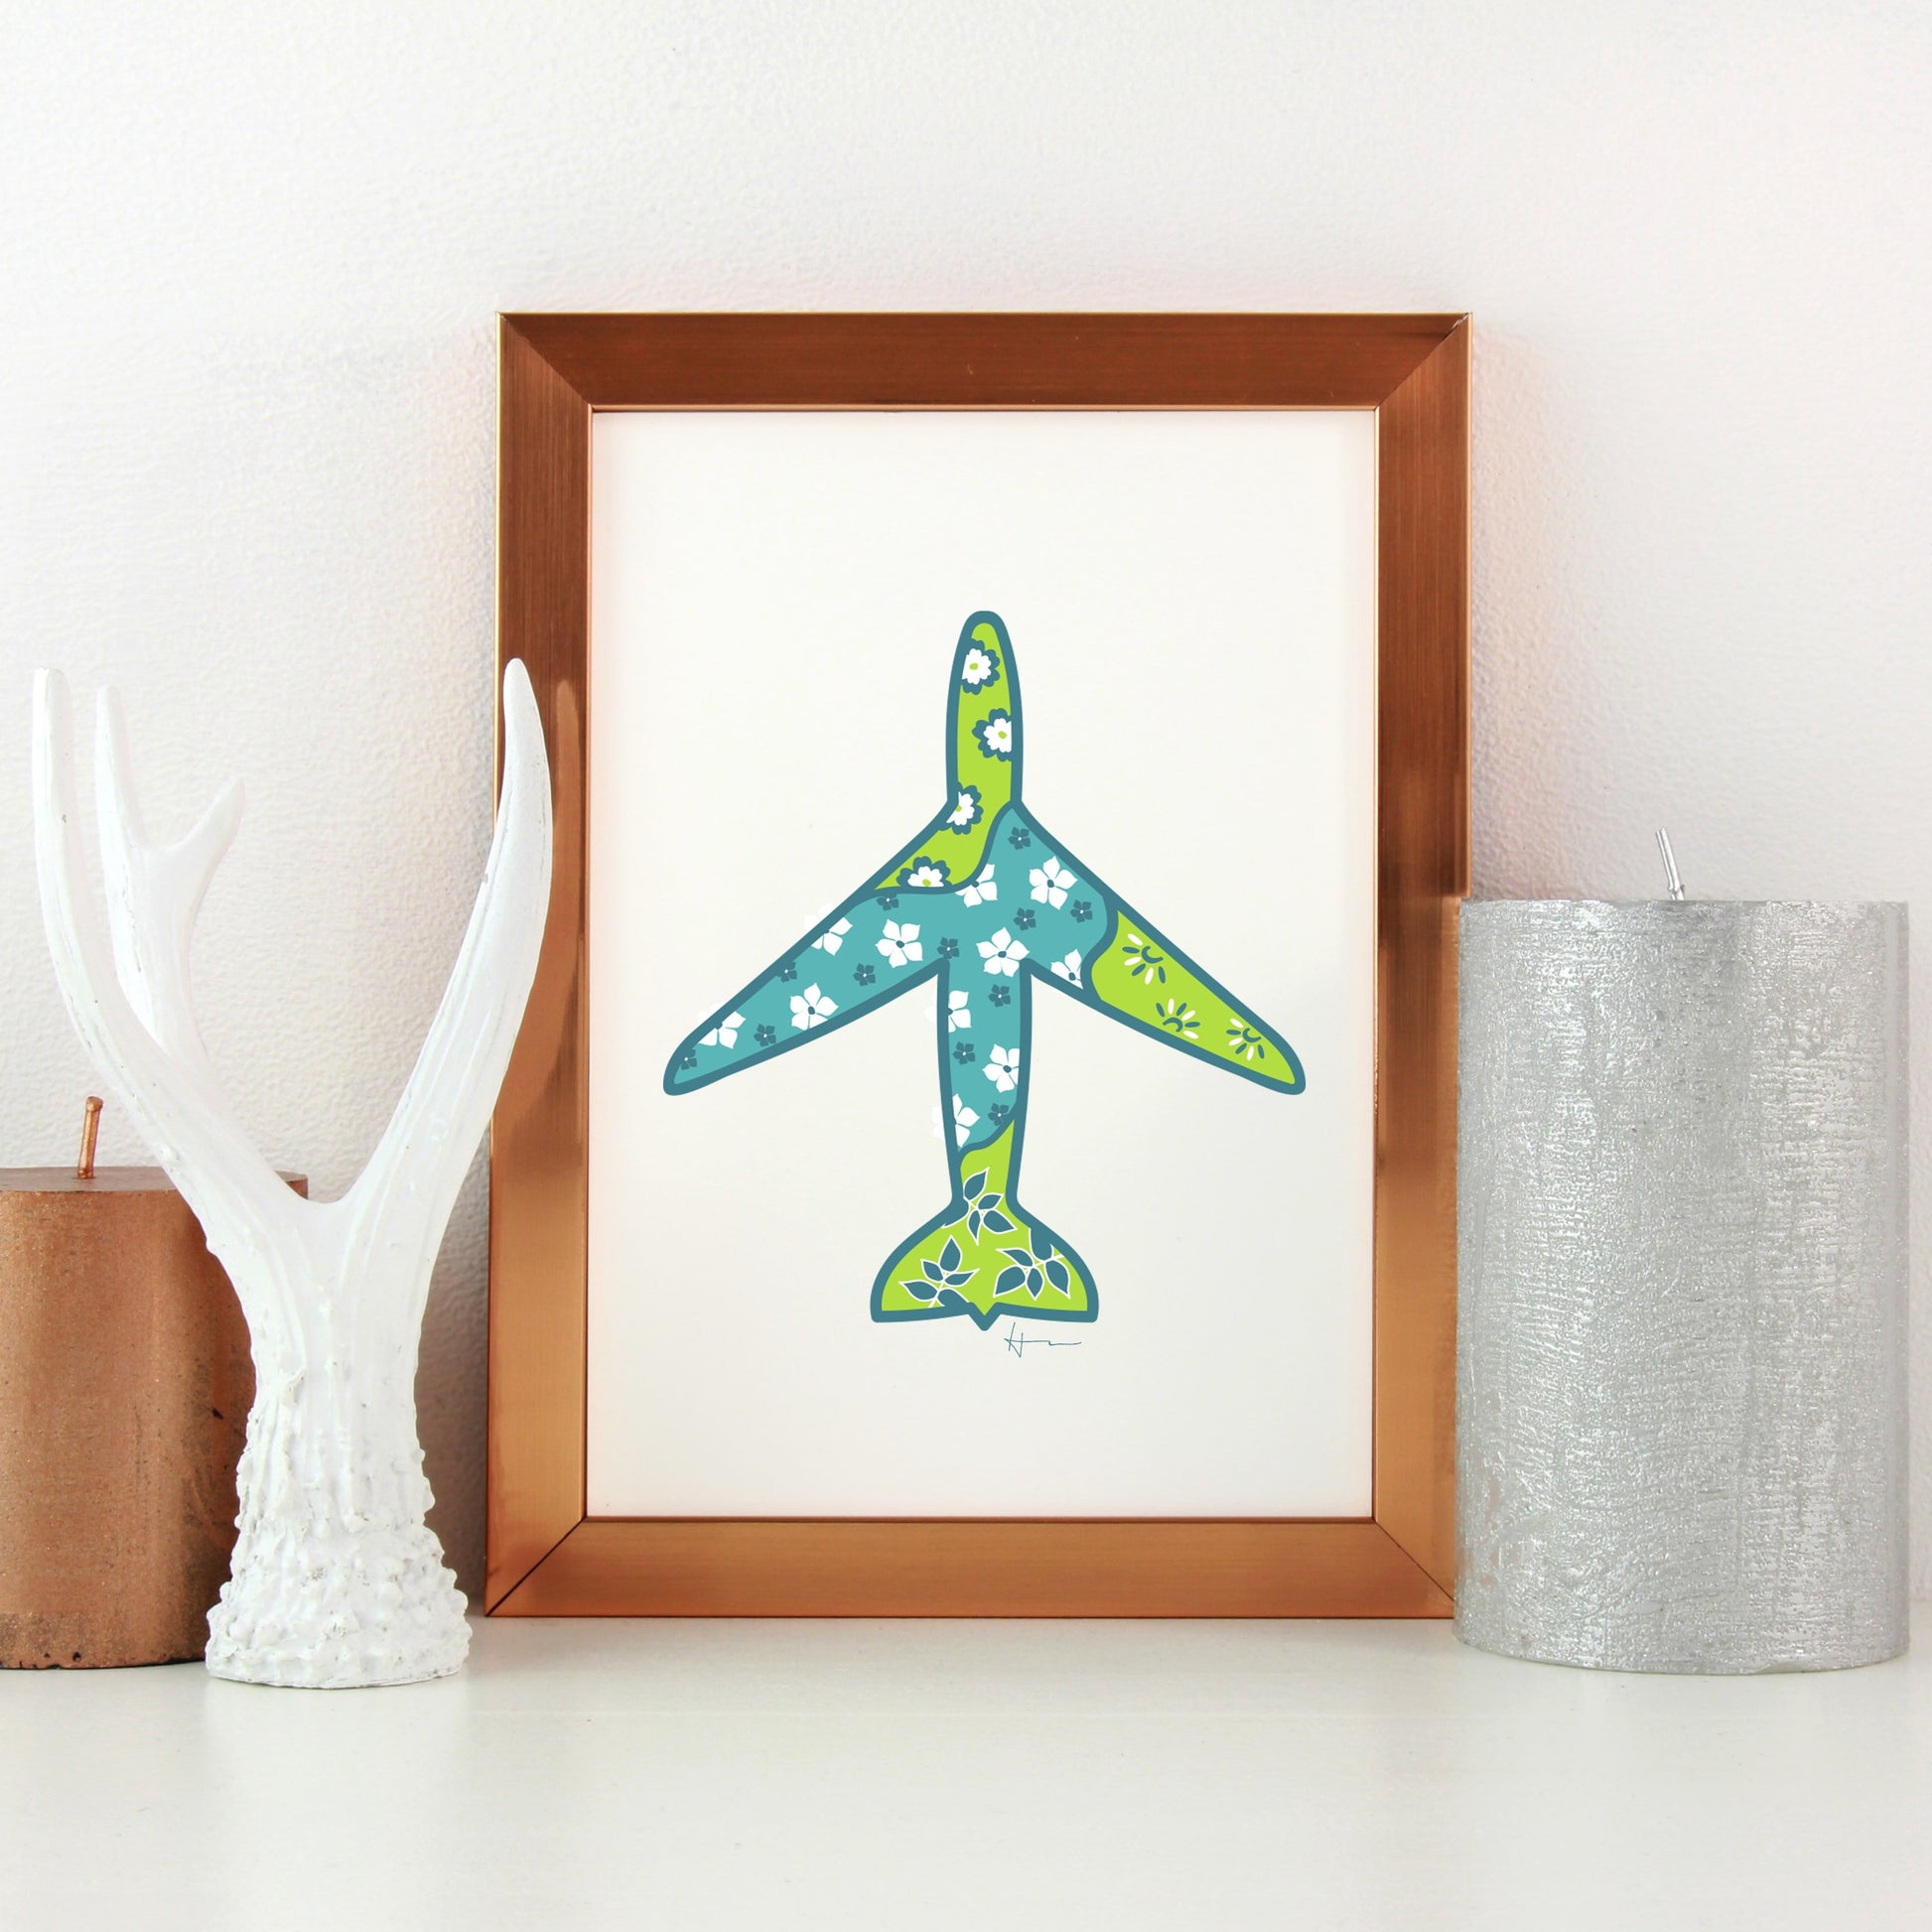 framed airplane illustration on a desk or white table with decorations on each side.